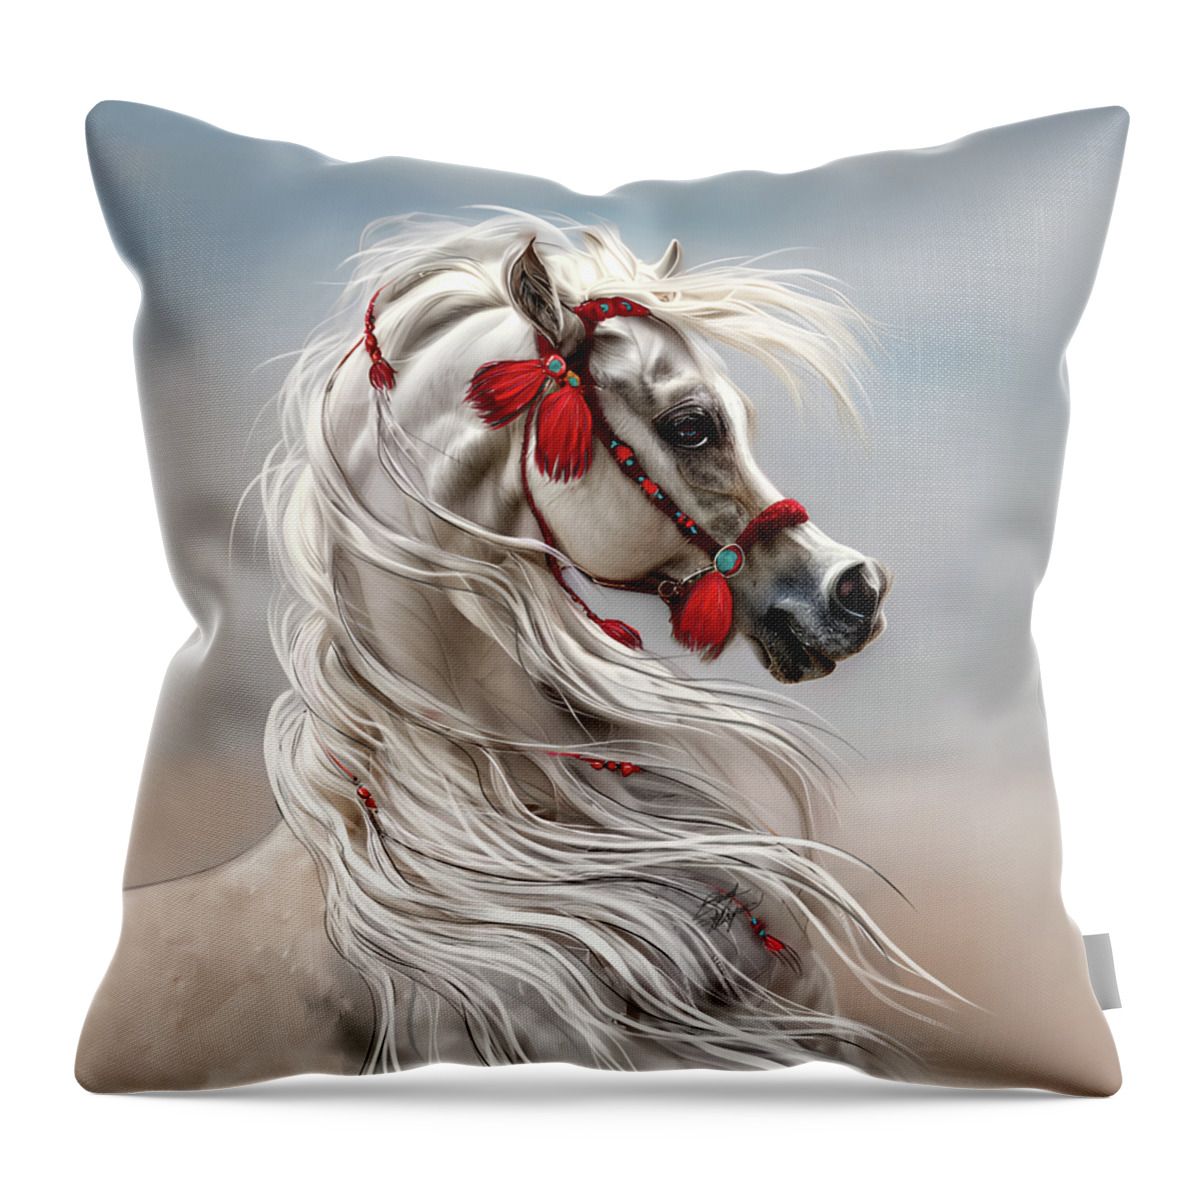 Equestrian Art Throw Pillow featuring the digital art Arabian with Red Tassels by Stacey Mayer by Stacey Mayer